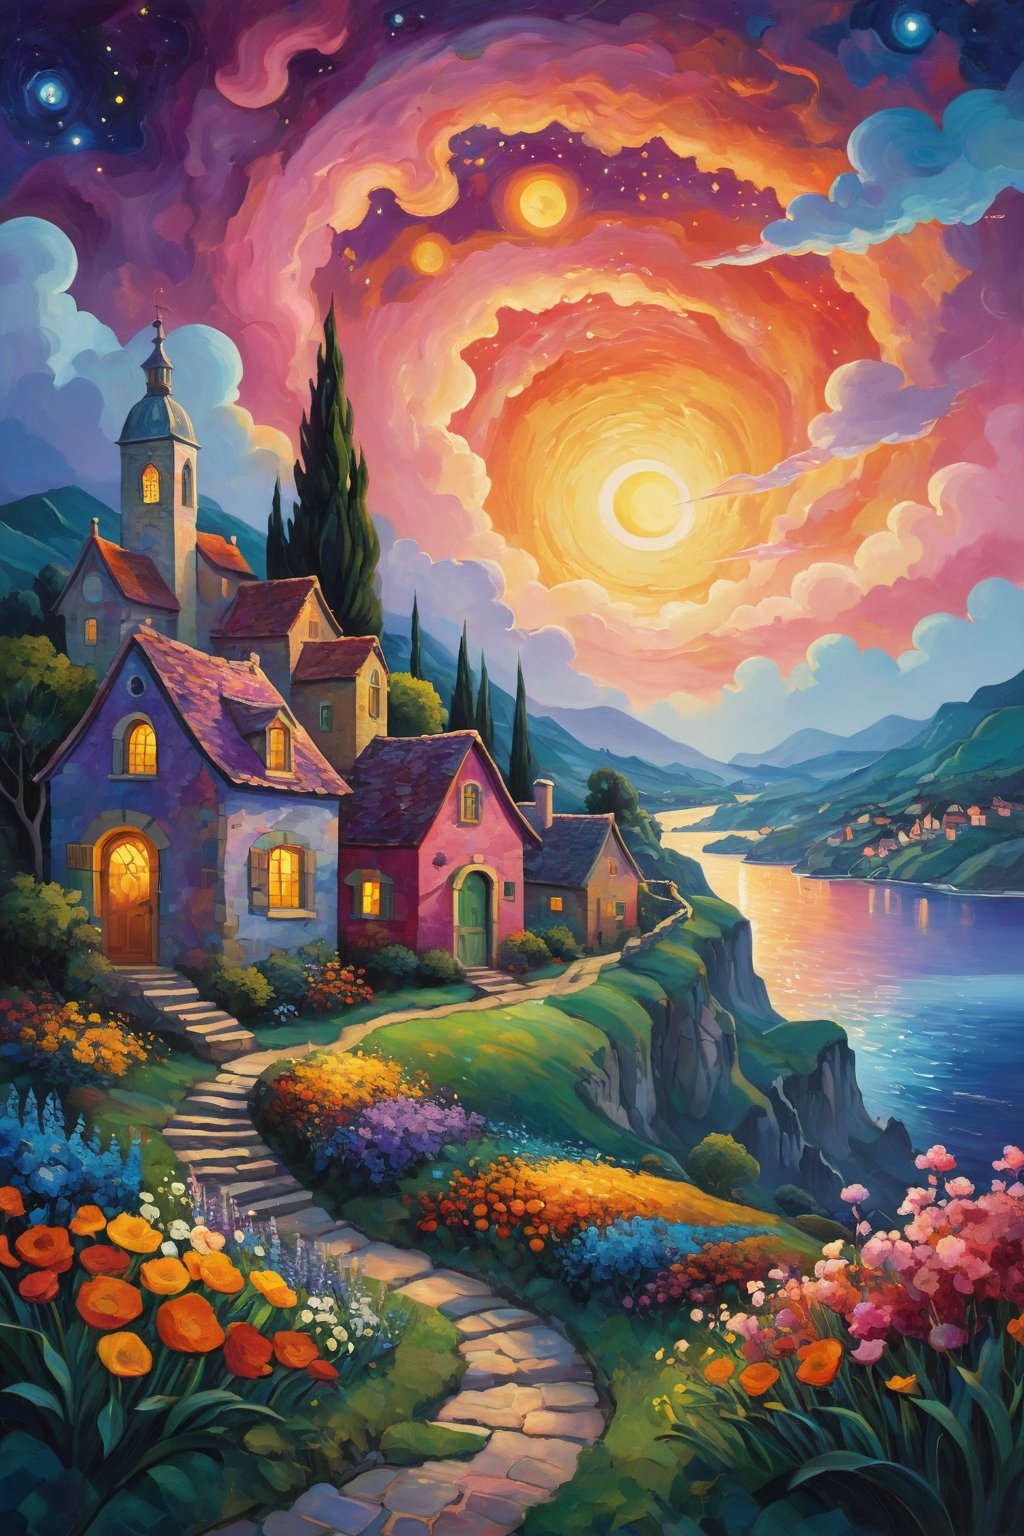 oil painting concept art, vibrant color, 

The starry night style, van gogh style, 

Colorful houses lining the old town surrounded by abundant flower. A peaceful night descends, with a beautiful sunset sky and colorful, storybook-like clouds, 

Create a whimsical and vibrant townscape with colorful, fantastical buildings, The color palette should include bright pinks, oranges, blues, and purples, with contrasting highlights and shadows to give depth, The brushwork should be smooth, with clean lines for the buildings and more fluid strokes for the sky and water reflections, The overall art style should evoke elements of surrealism mixed with folk art, Draw inspiration from artists like Marc Chagall for dreamlike scenes and Joan Miró for bold colors and shapes,

a image for a póster of psytrance festival, contains fractals, spiritual composition, the imagen evoke happiness and energy. the imagen contains organic textures and surreal composition. some parts of the image evoke a las trip